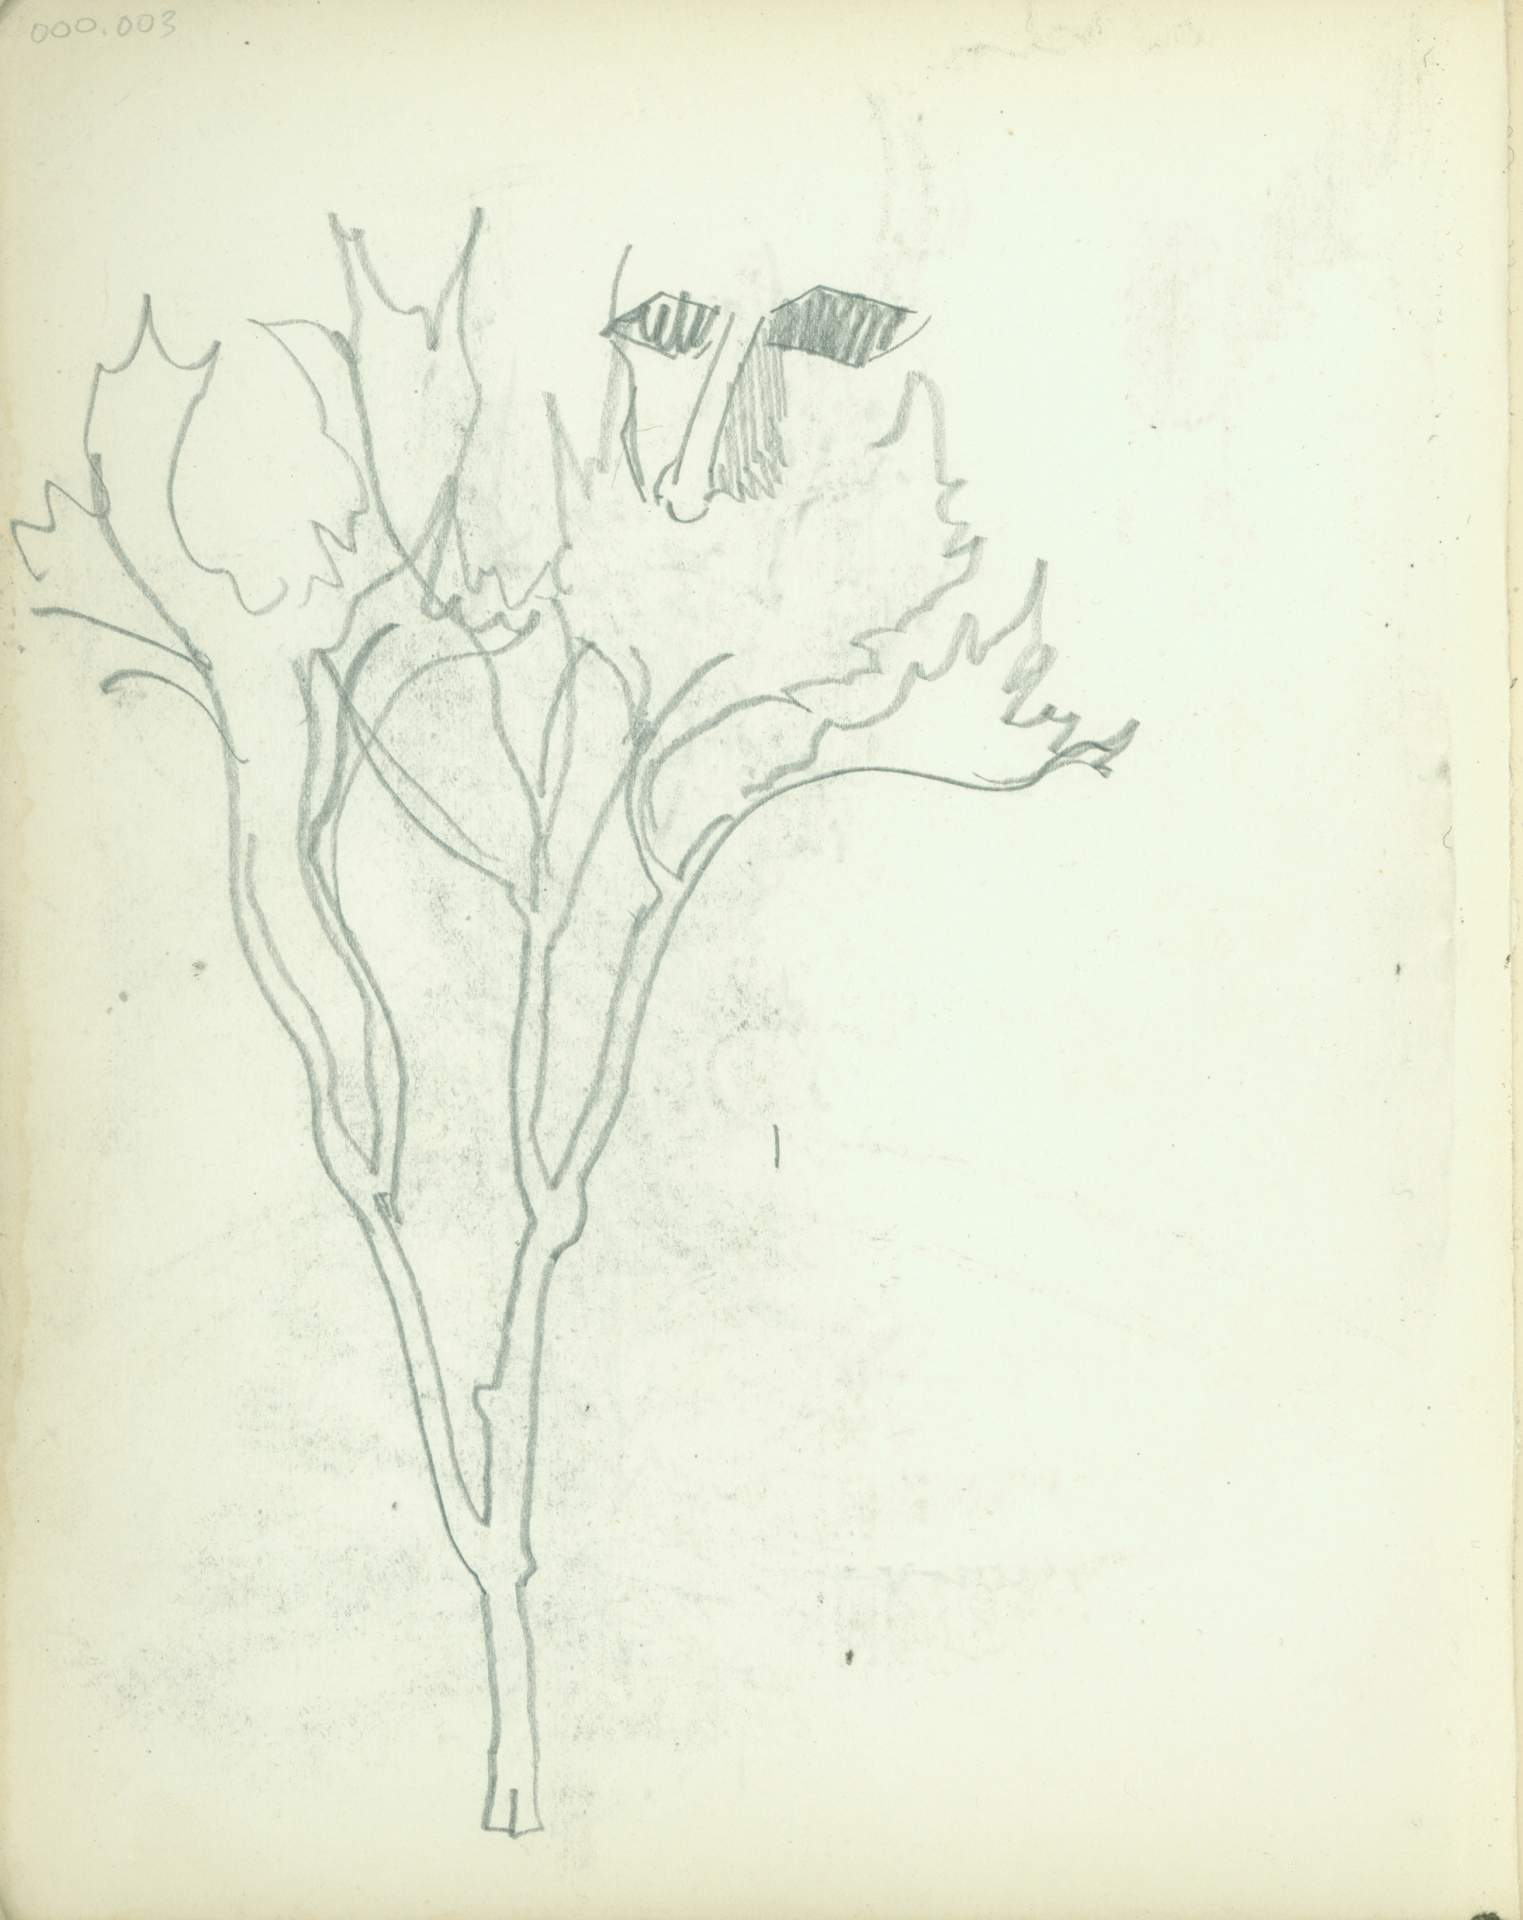 Untitled (tree sketch with face)